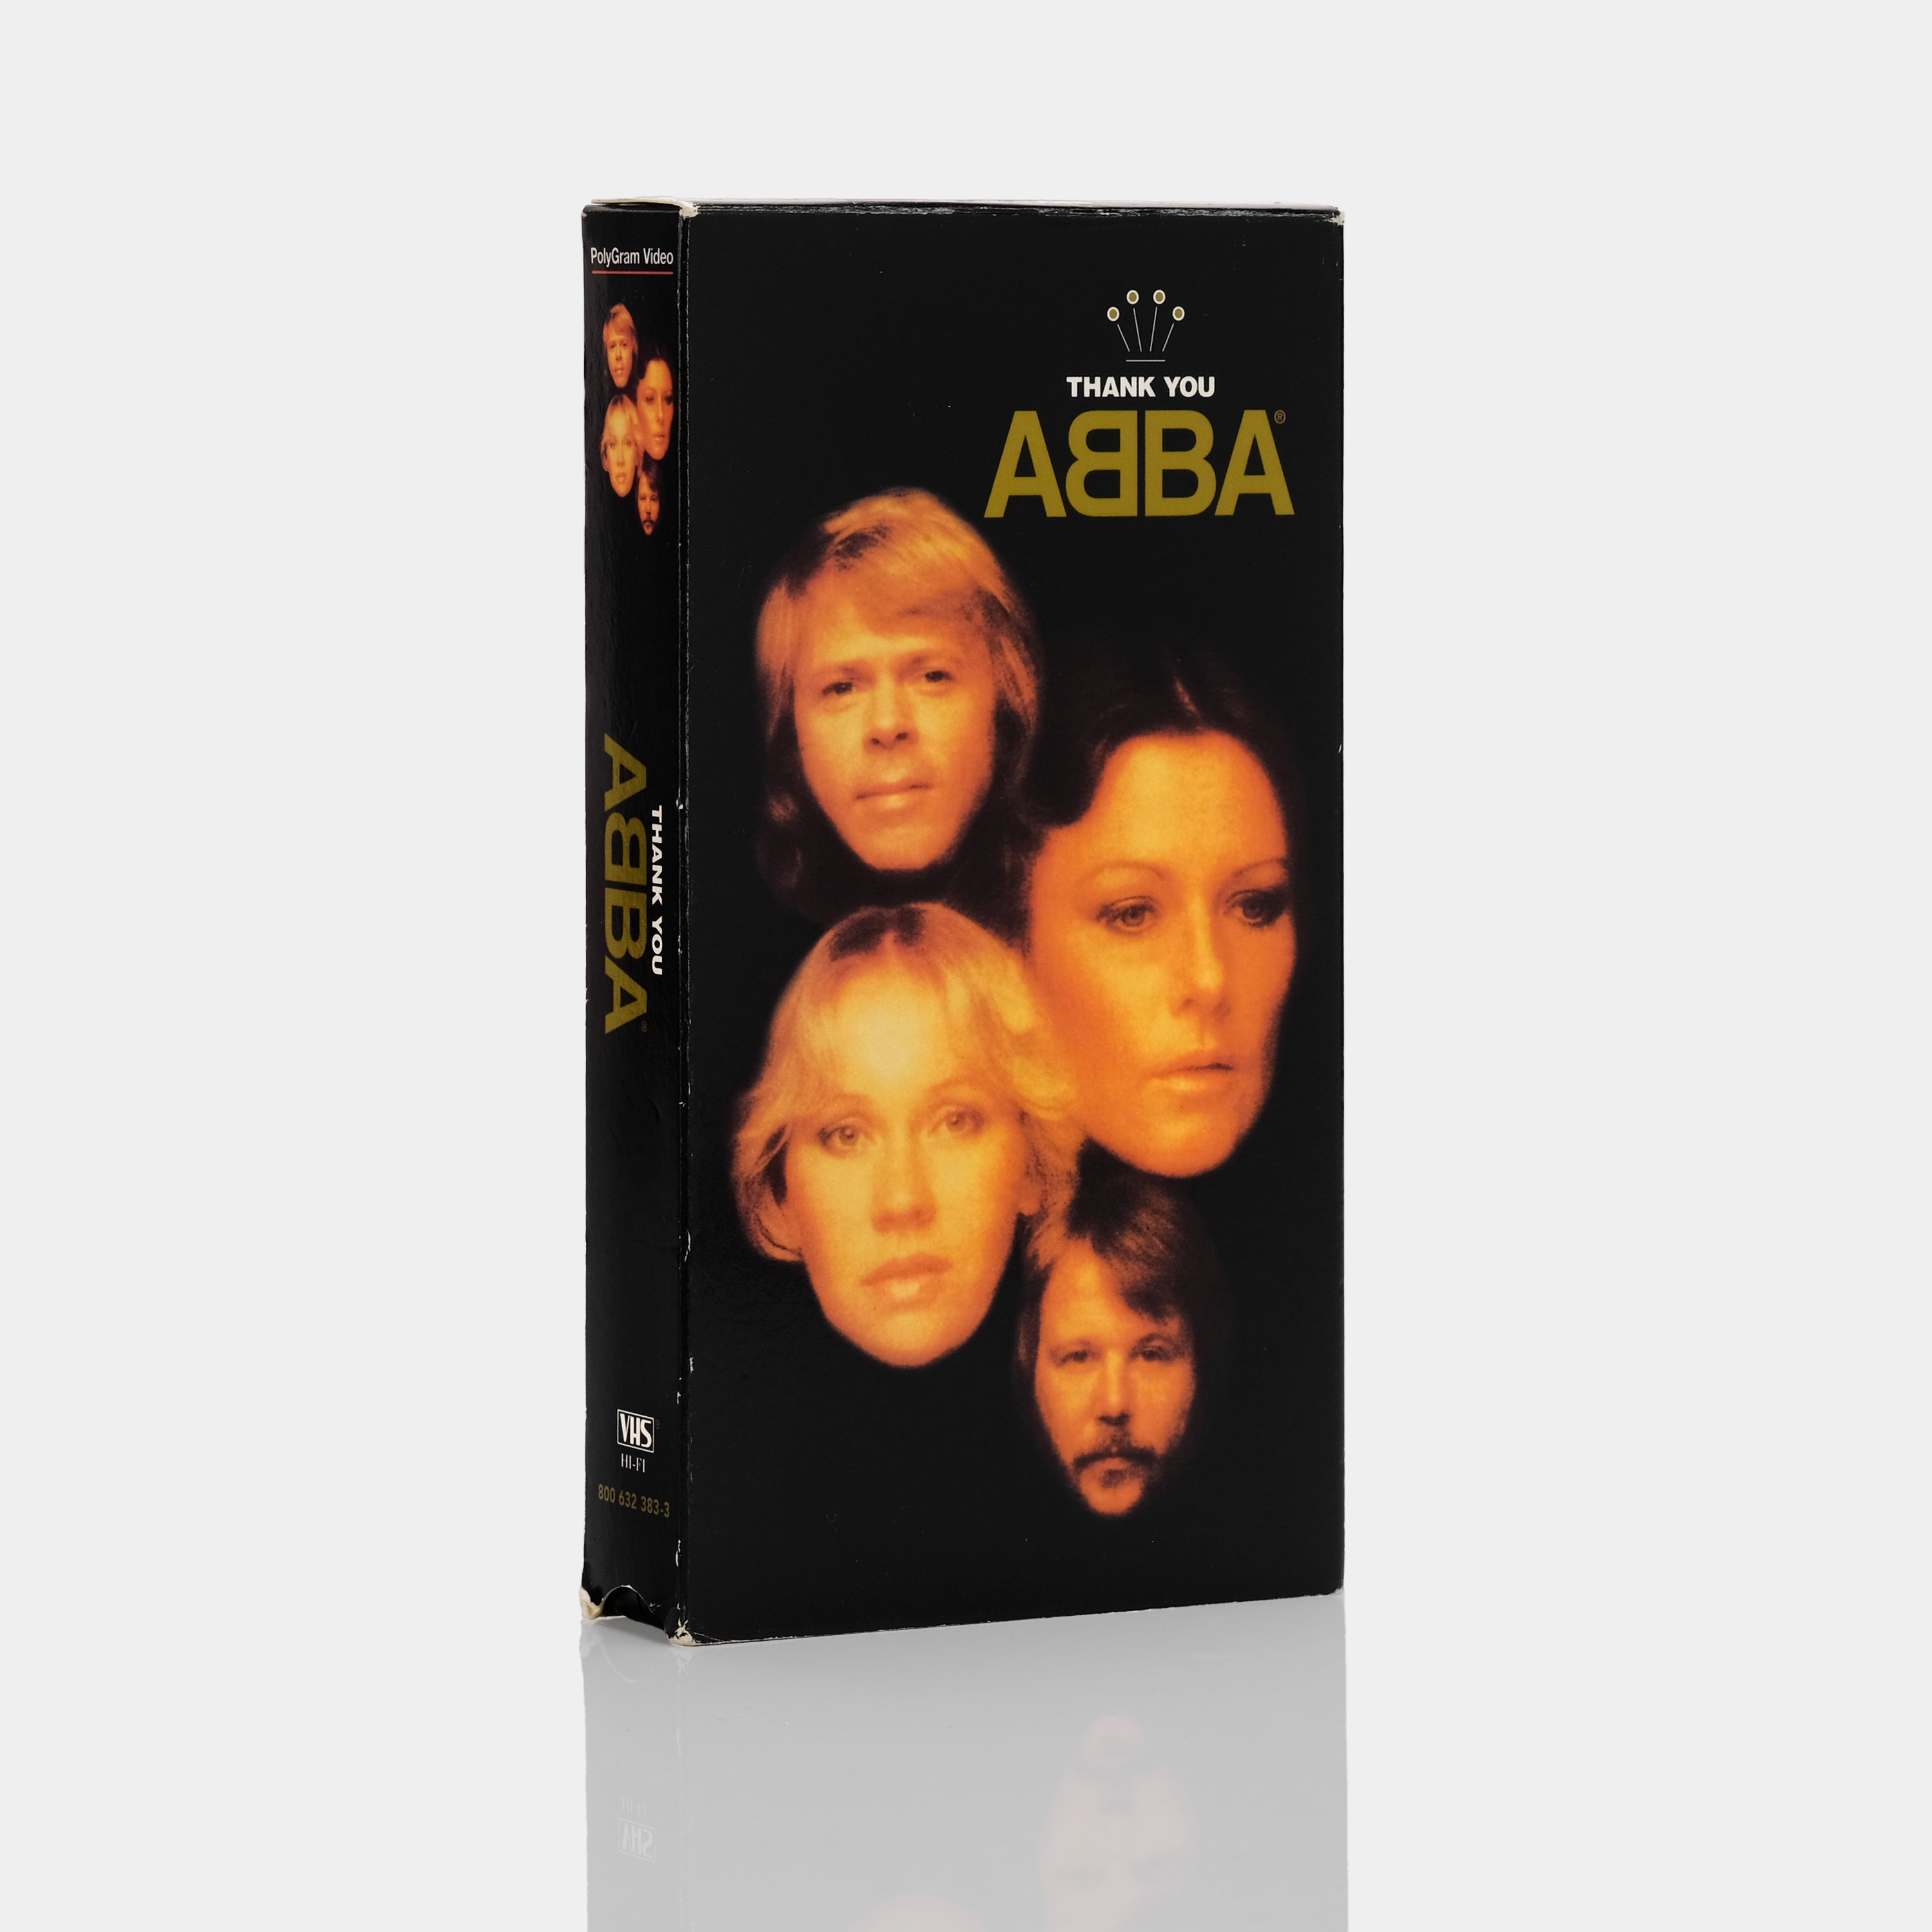 Thank You ABBA VHS Tape